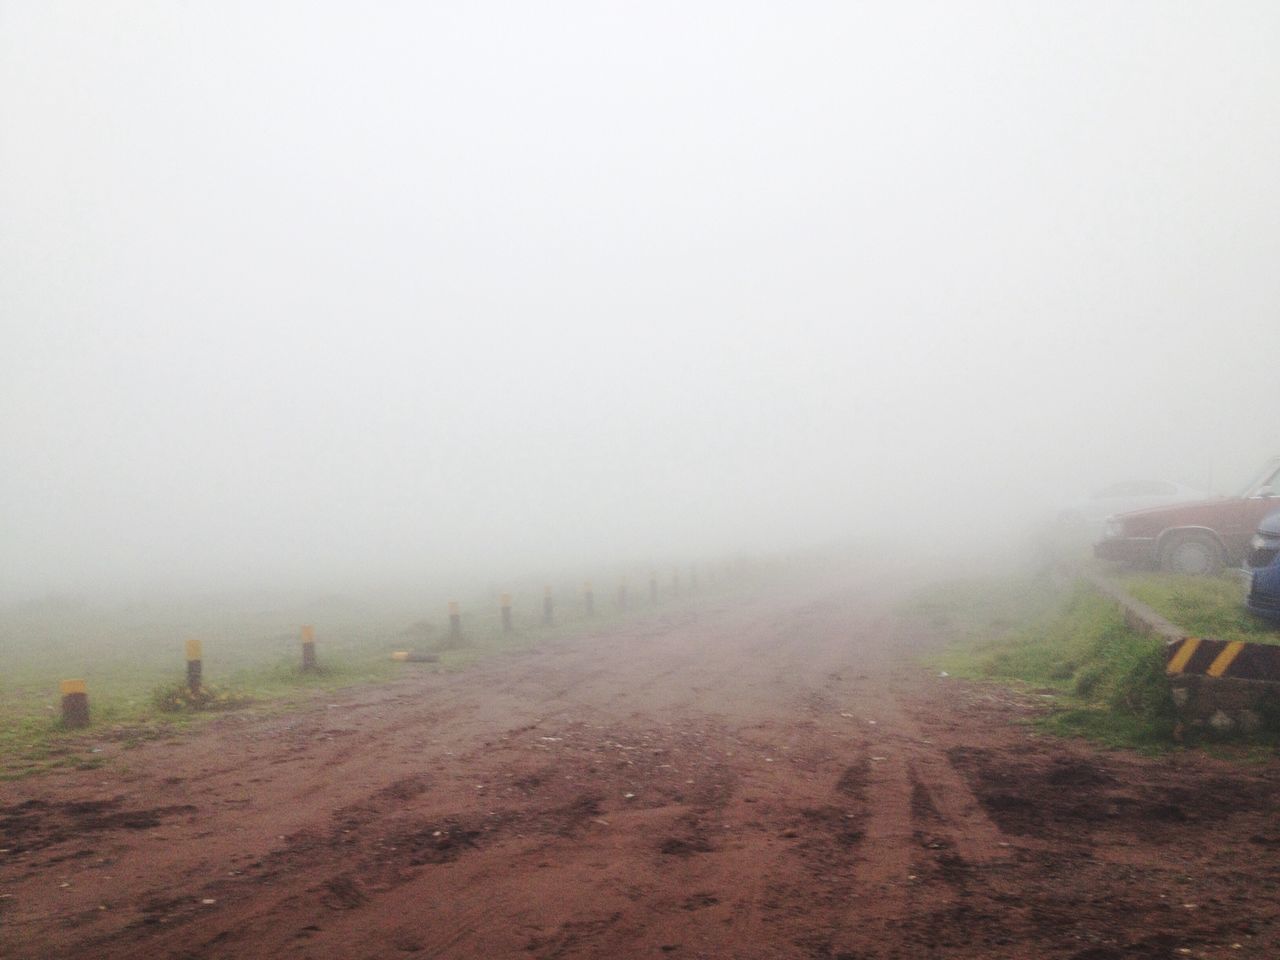 fog, foggy, weather, copy space, tranquil scene, tranquility, mist, landscape, nature, scenics, beauty in nature, the way forward, field, tree, non-urban scene, day, dirt road, outdoors, sky